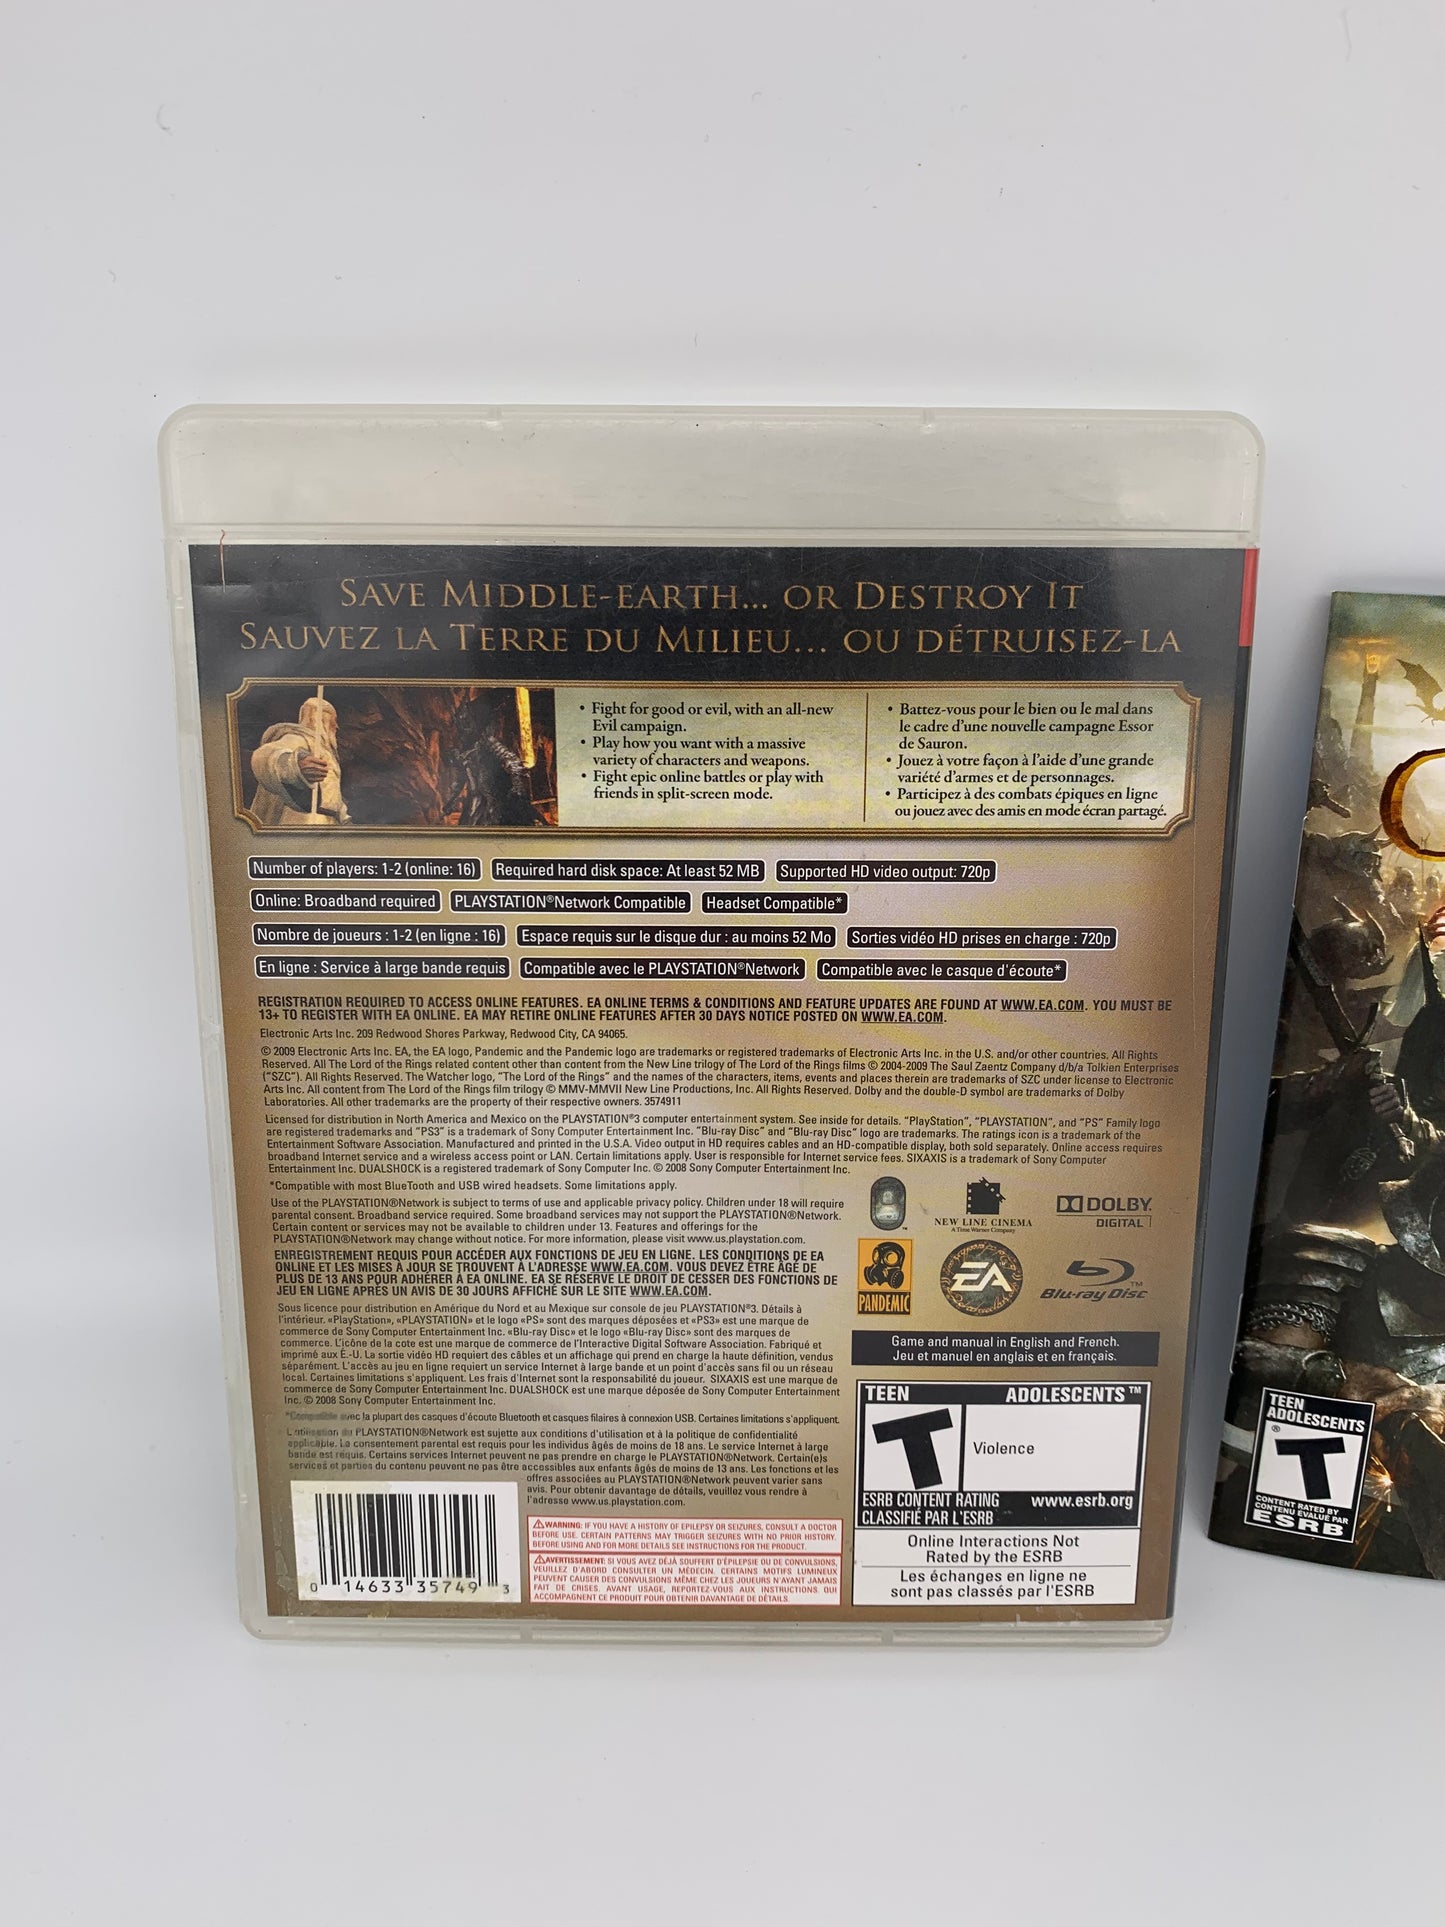 SONY PLAYSTATiON 3 [PS3] | THE LORD OF THE RiNGS CONQUEST